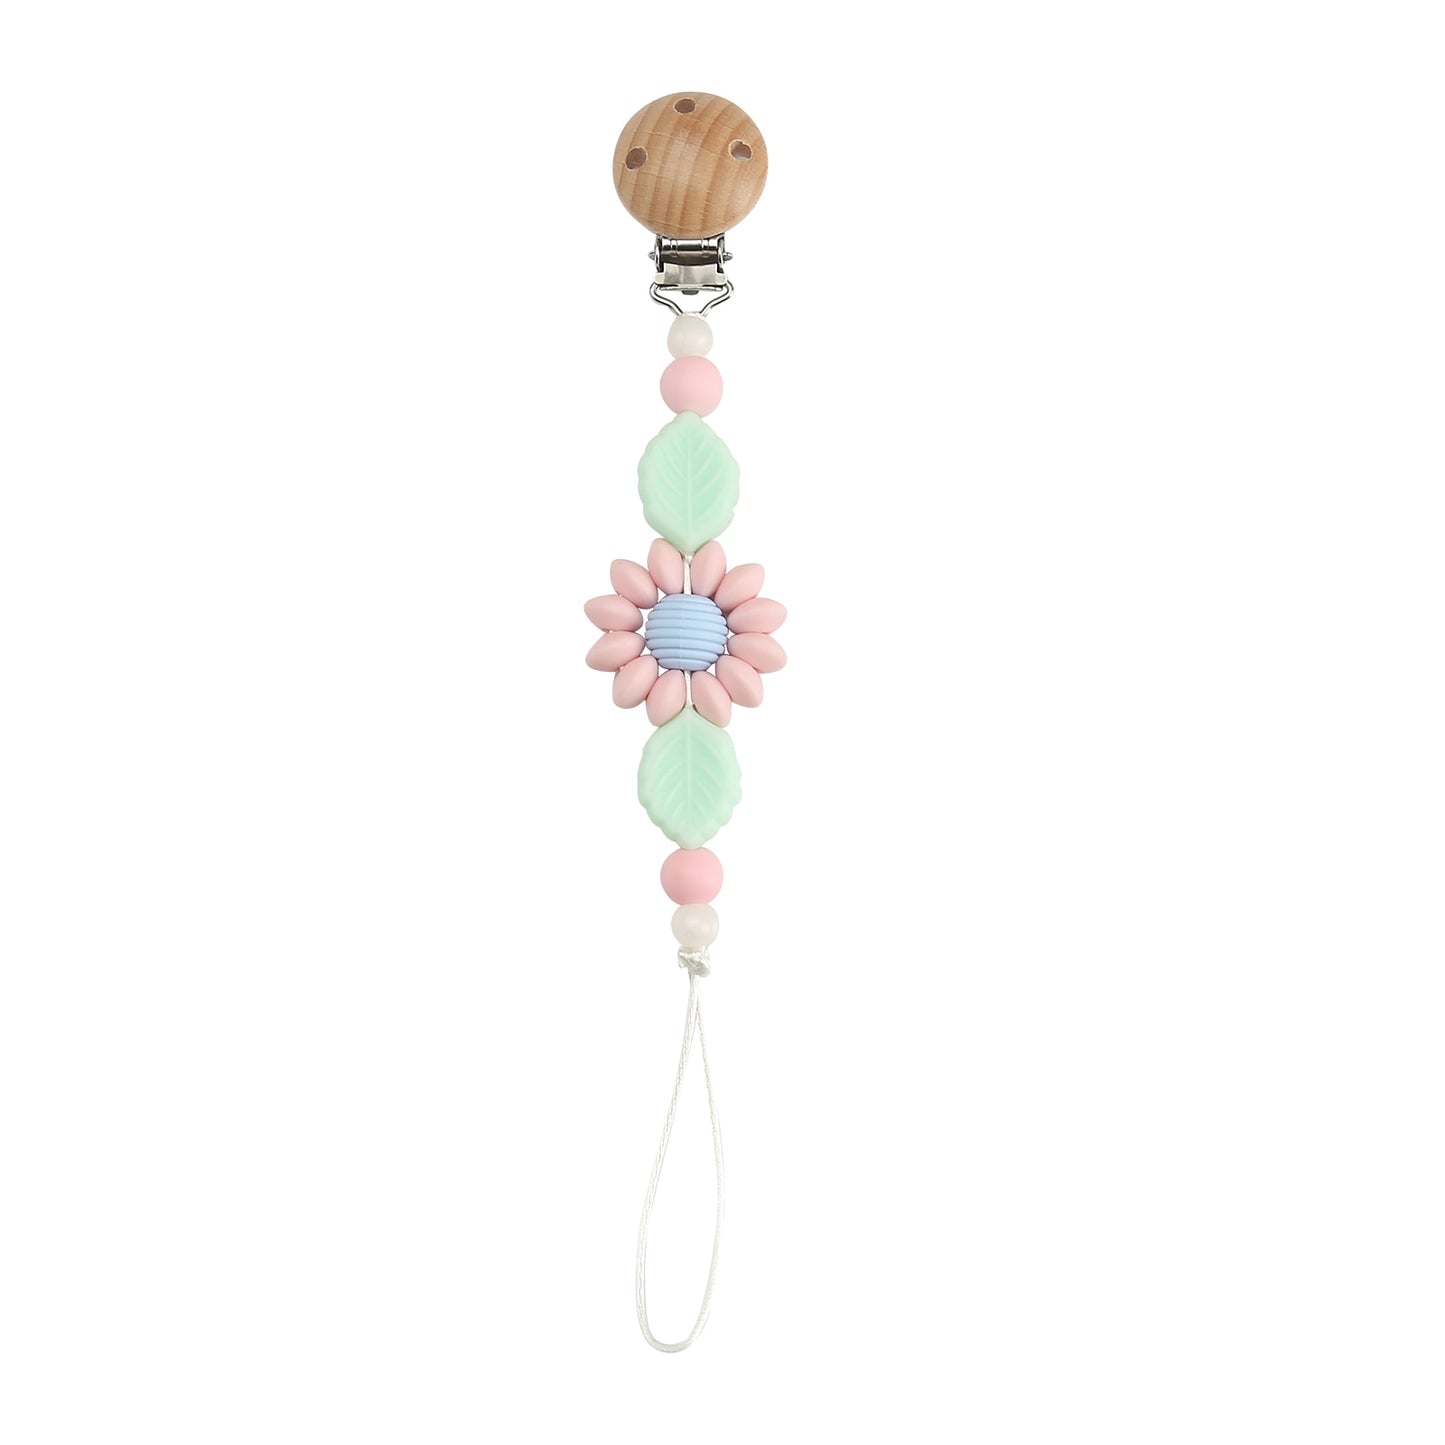 1 Pcs Baby Pacifier Clips Flowers Shape BPA Free Silicone Teething Beads Pacifier Chain Holder Dummy Feeding Clip Soother Chain